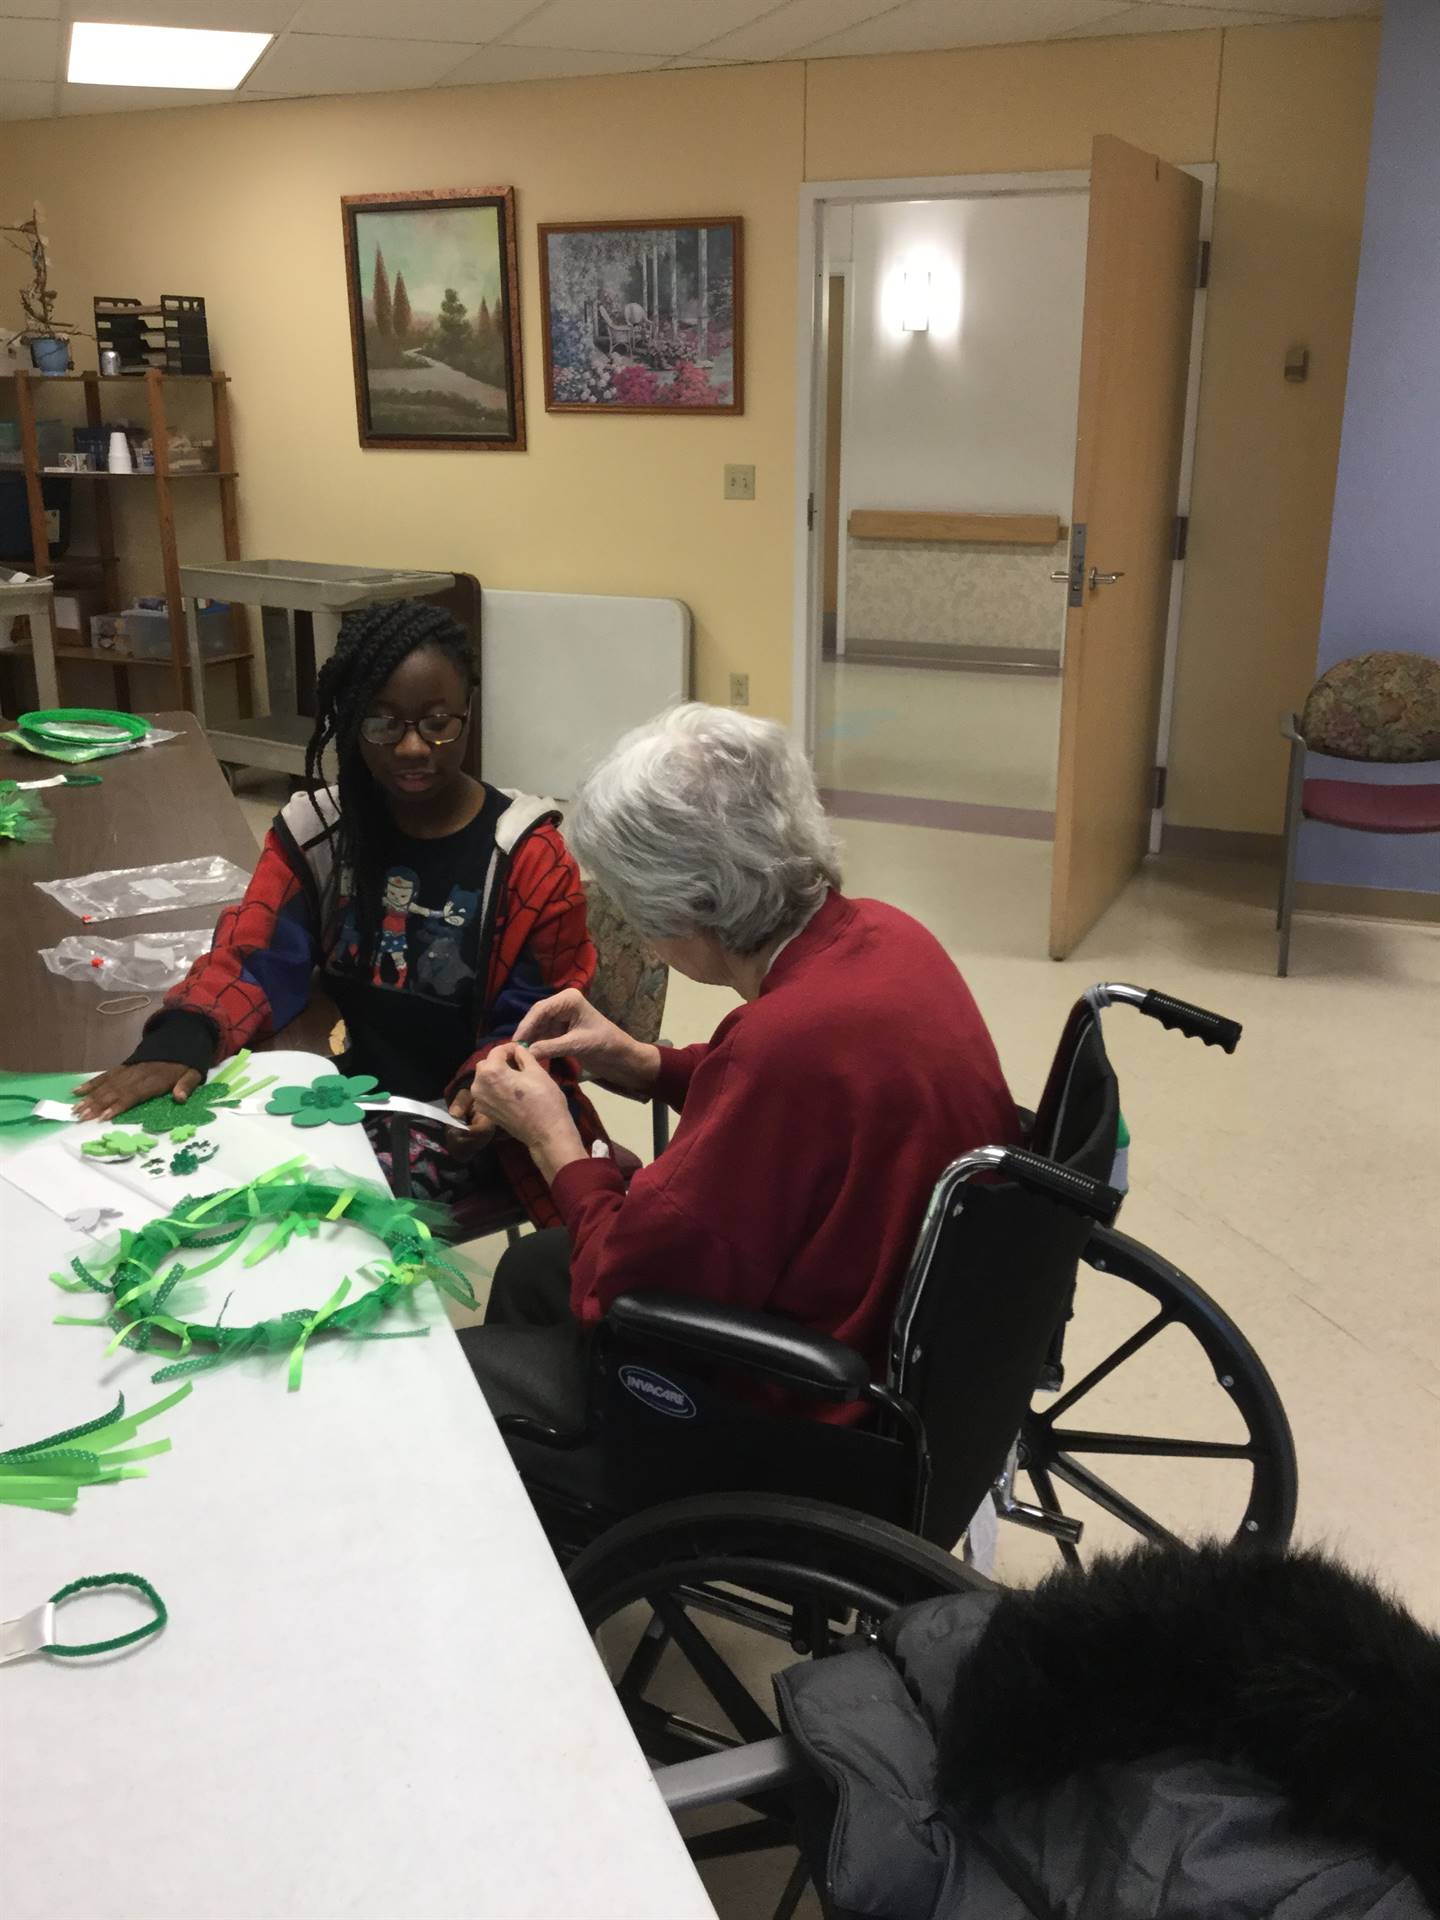 students with residents at Jennings Hall making St. Patrick's Day crafts